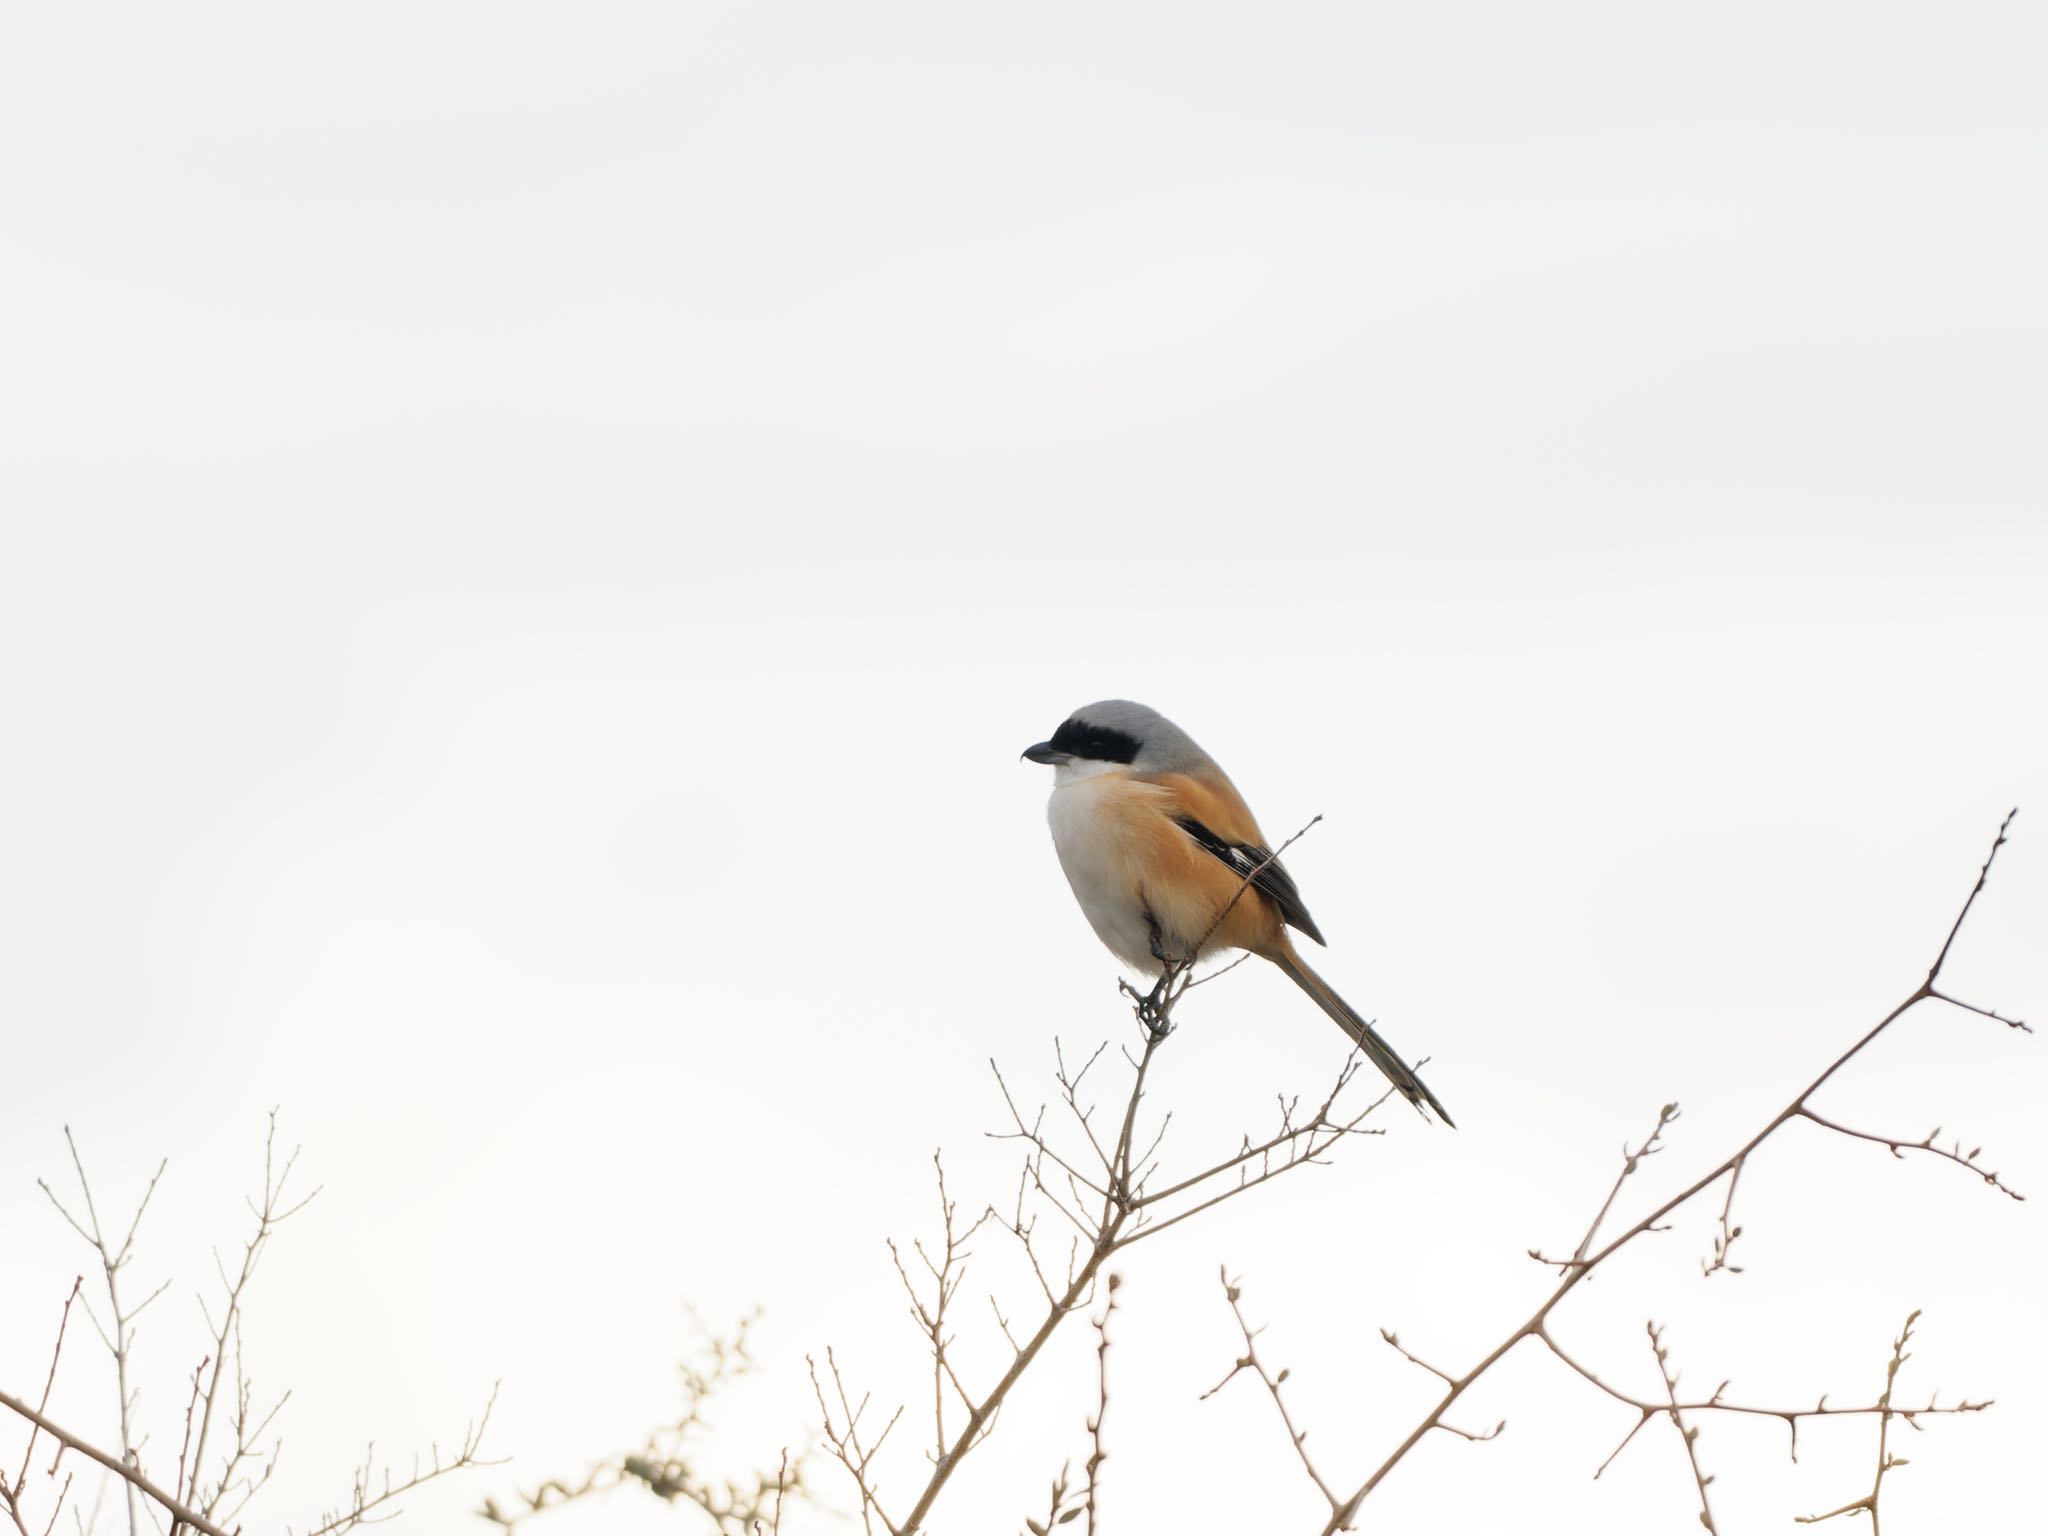 Photo of Long-tailed Shrike at 神戸市 by speedgame